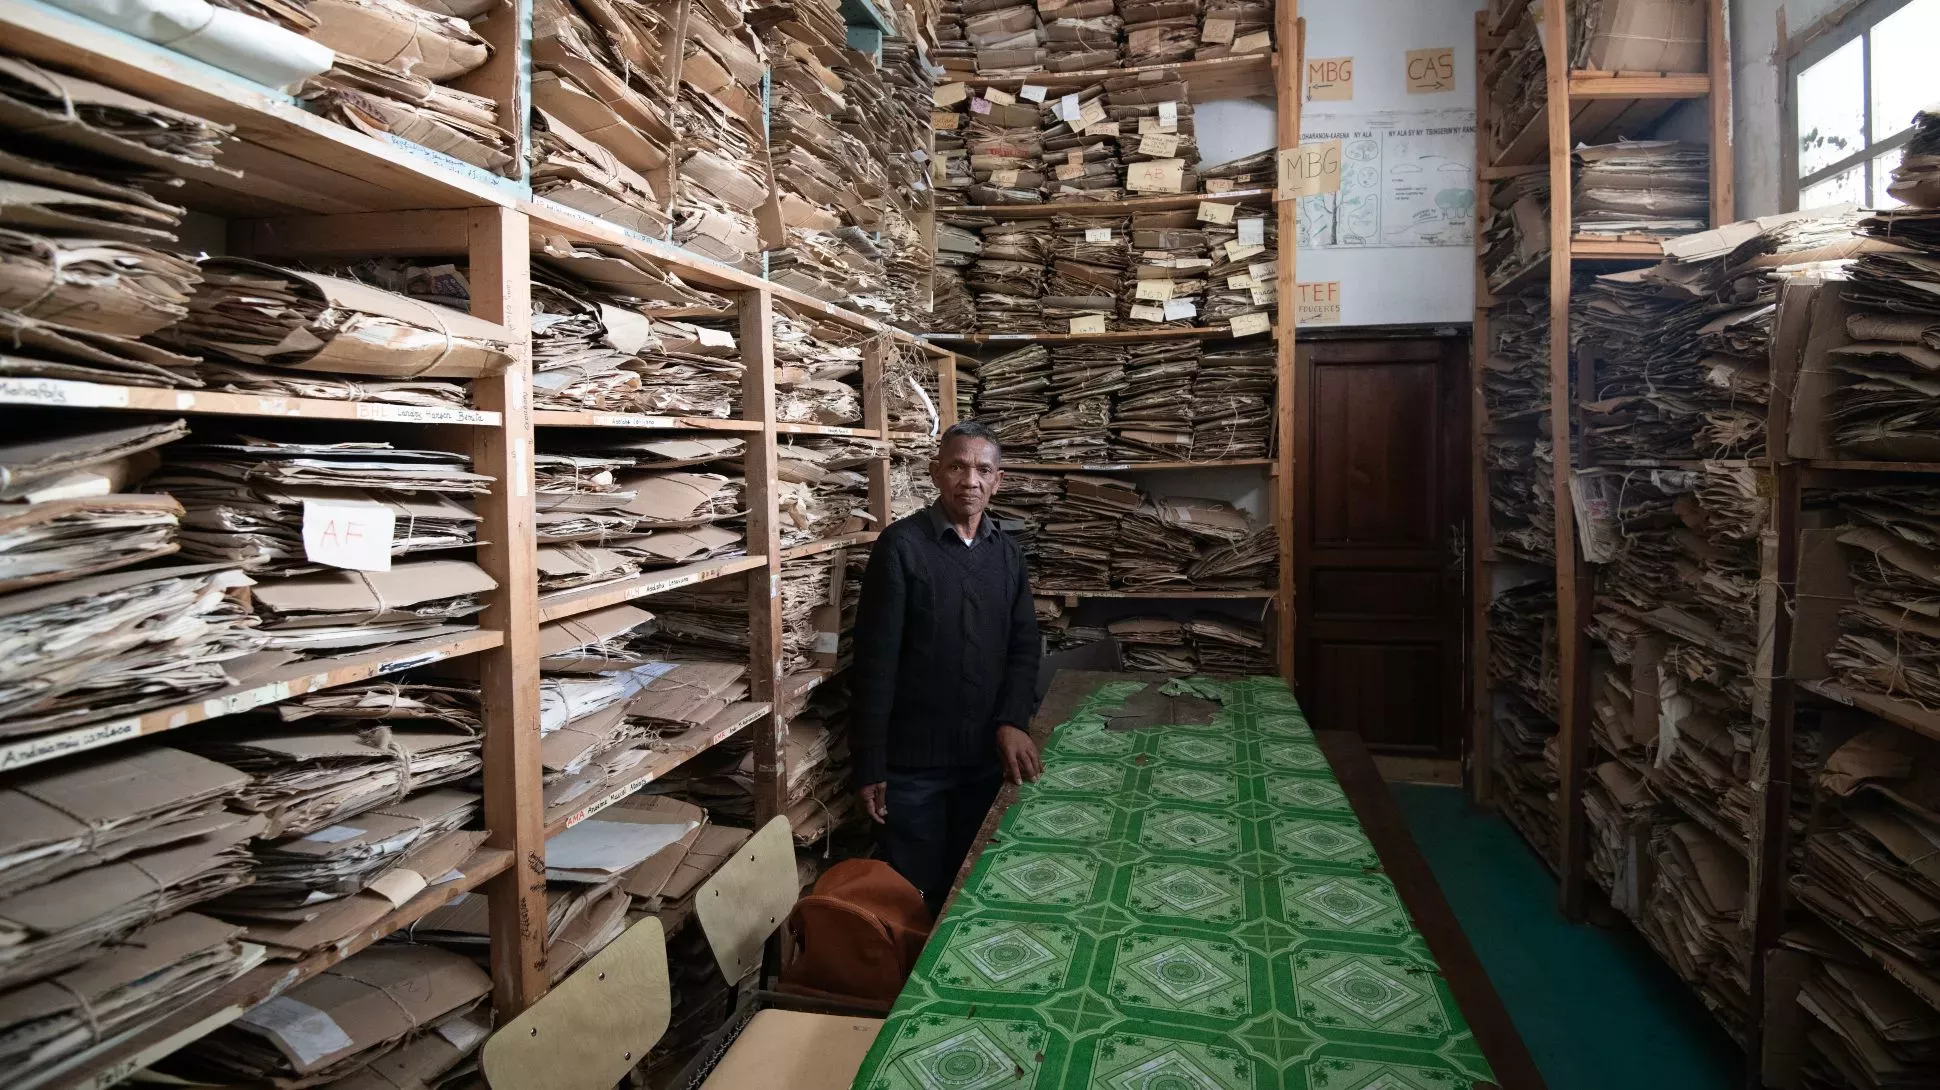 A man standing in a room filled with shelves full of paper